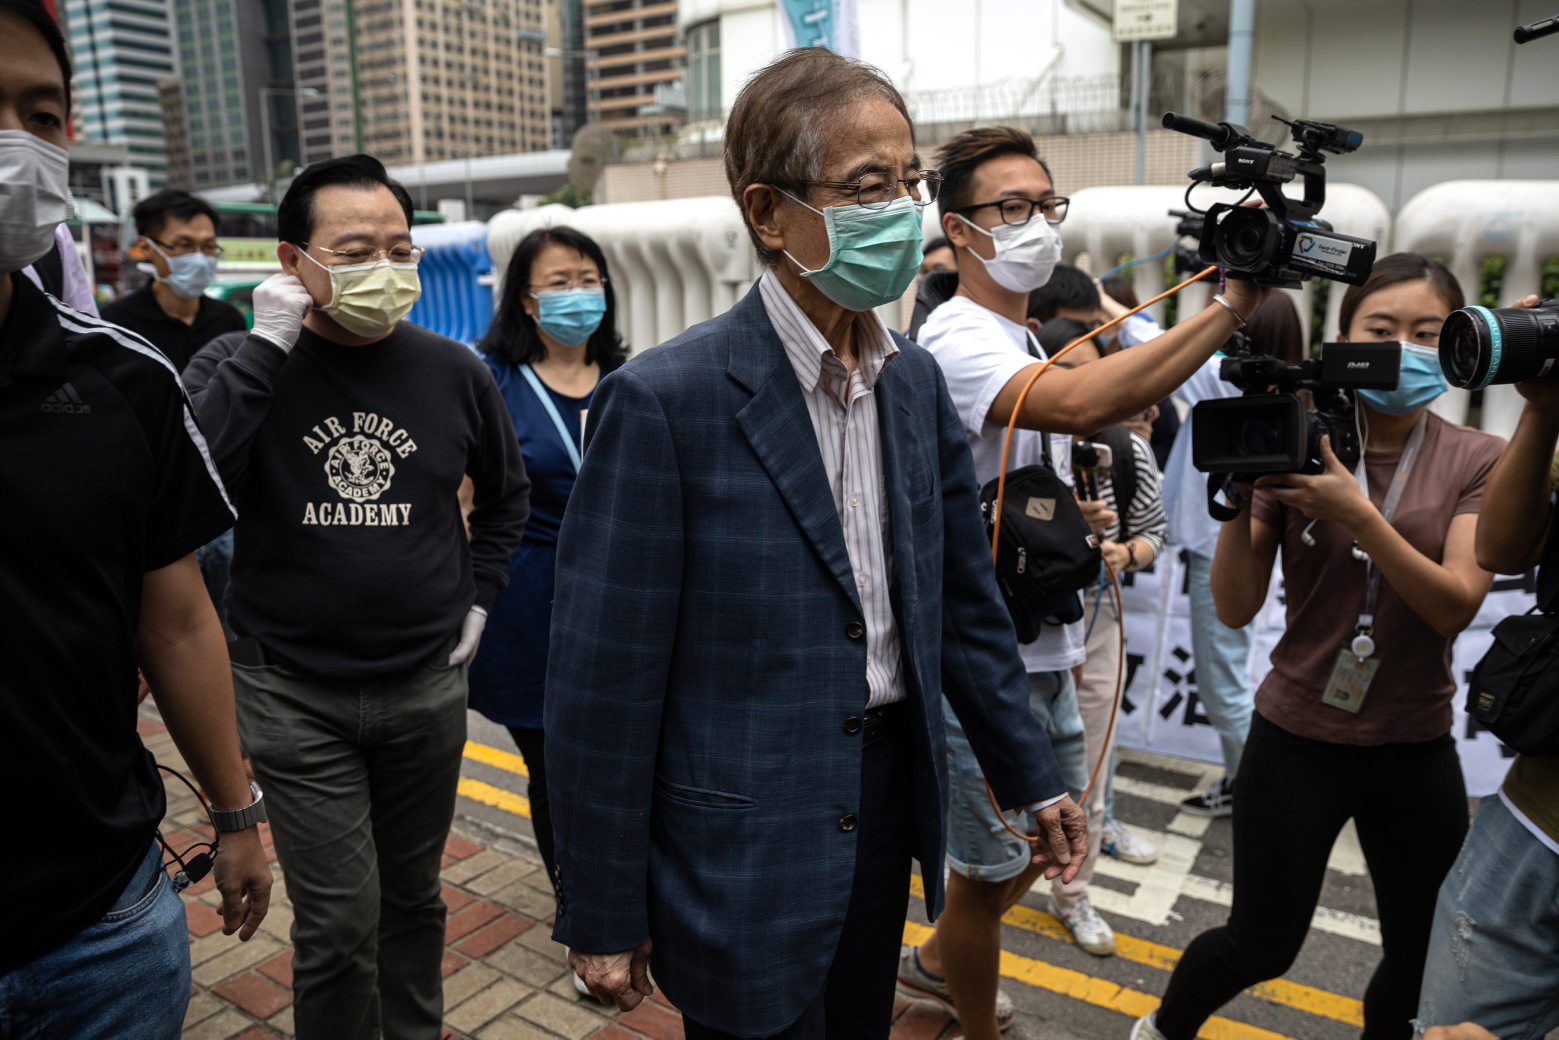 epa08370341 Veteran pro-democracy figure and former lawmaker Martin Lee (C) is chased by journalists after walking out of Central Police Station in Hong Kong, China, 18 April 2020.  Police arrested 14 high-profile pro-democracy figures in connection with several anti-government protests of 2019, including media tycoon Jimmy Lai and veteran pro-democracy figure and former lawmaker Martin Lee.  EPA/JEROME FAVRE CHINA HONG KONG PRO-DEMOCRACY ARRESTS